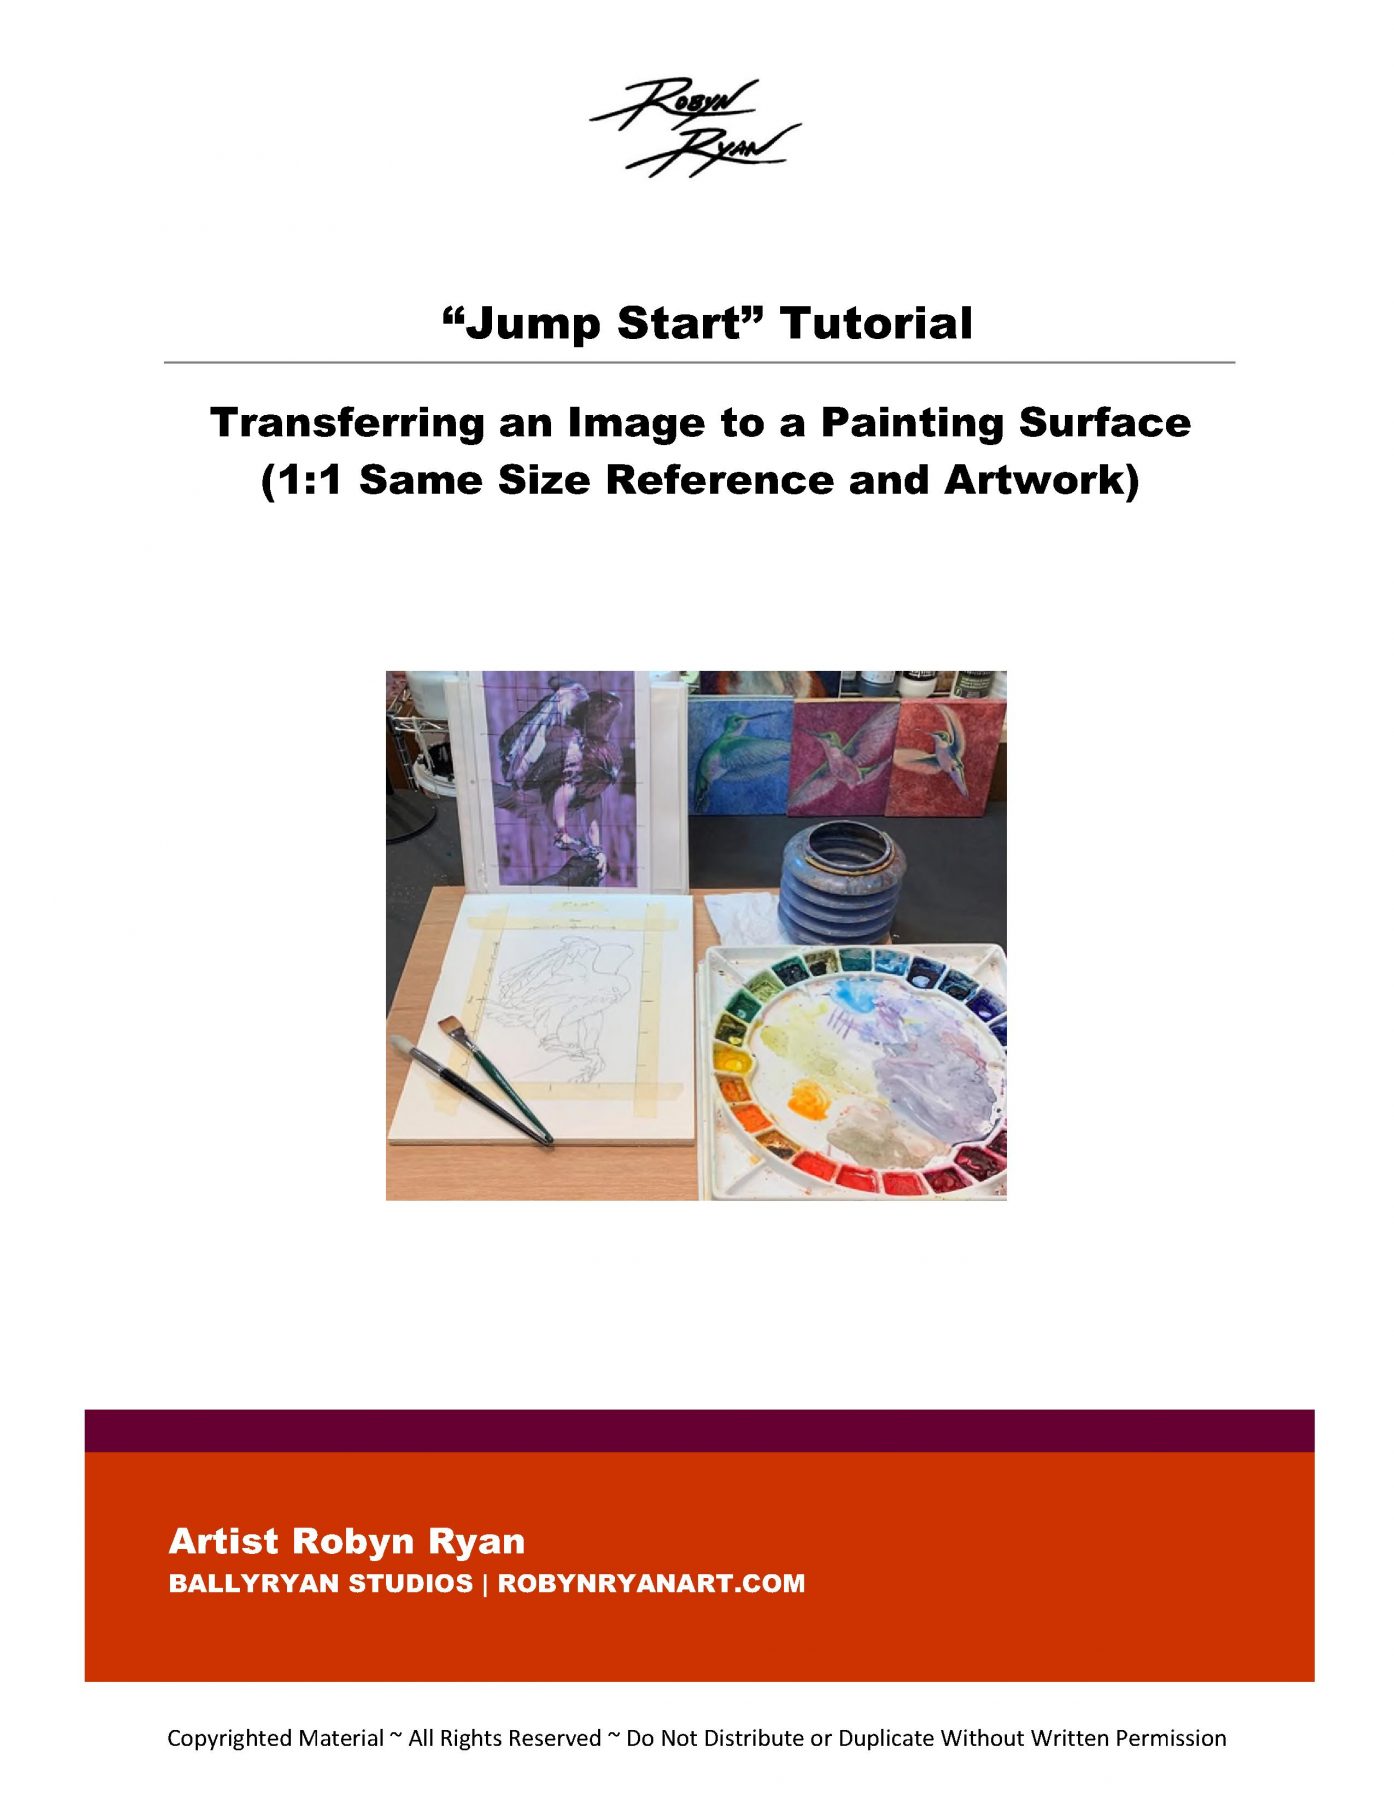 Jump Start Tutorial on transferring image to painting surface.